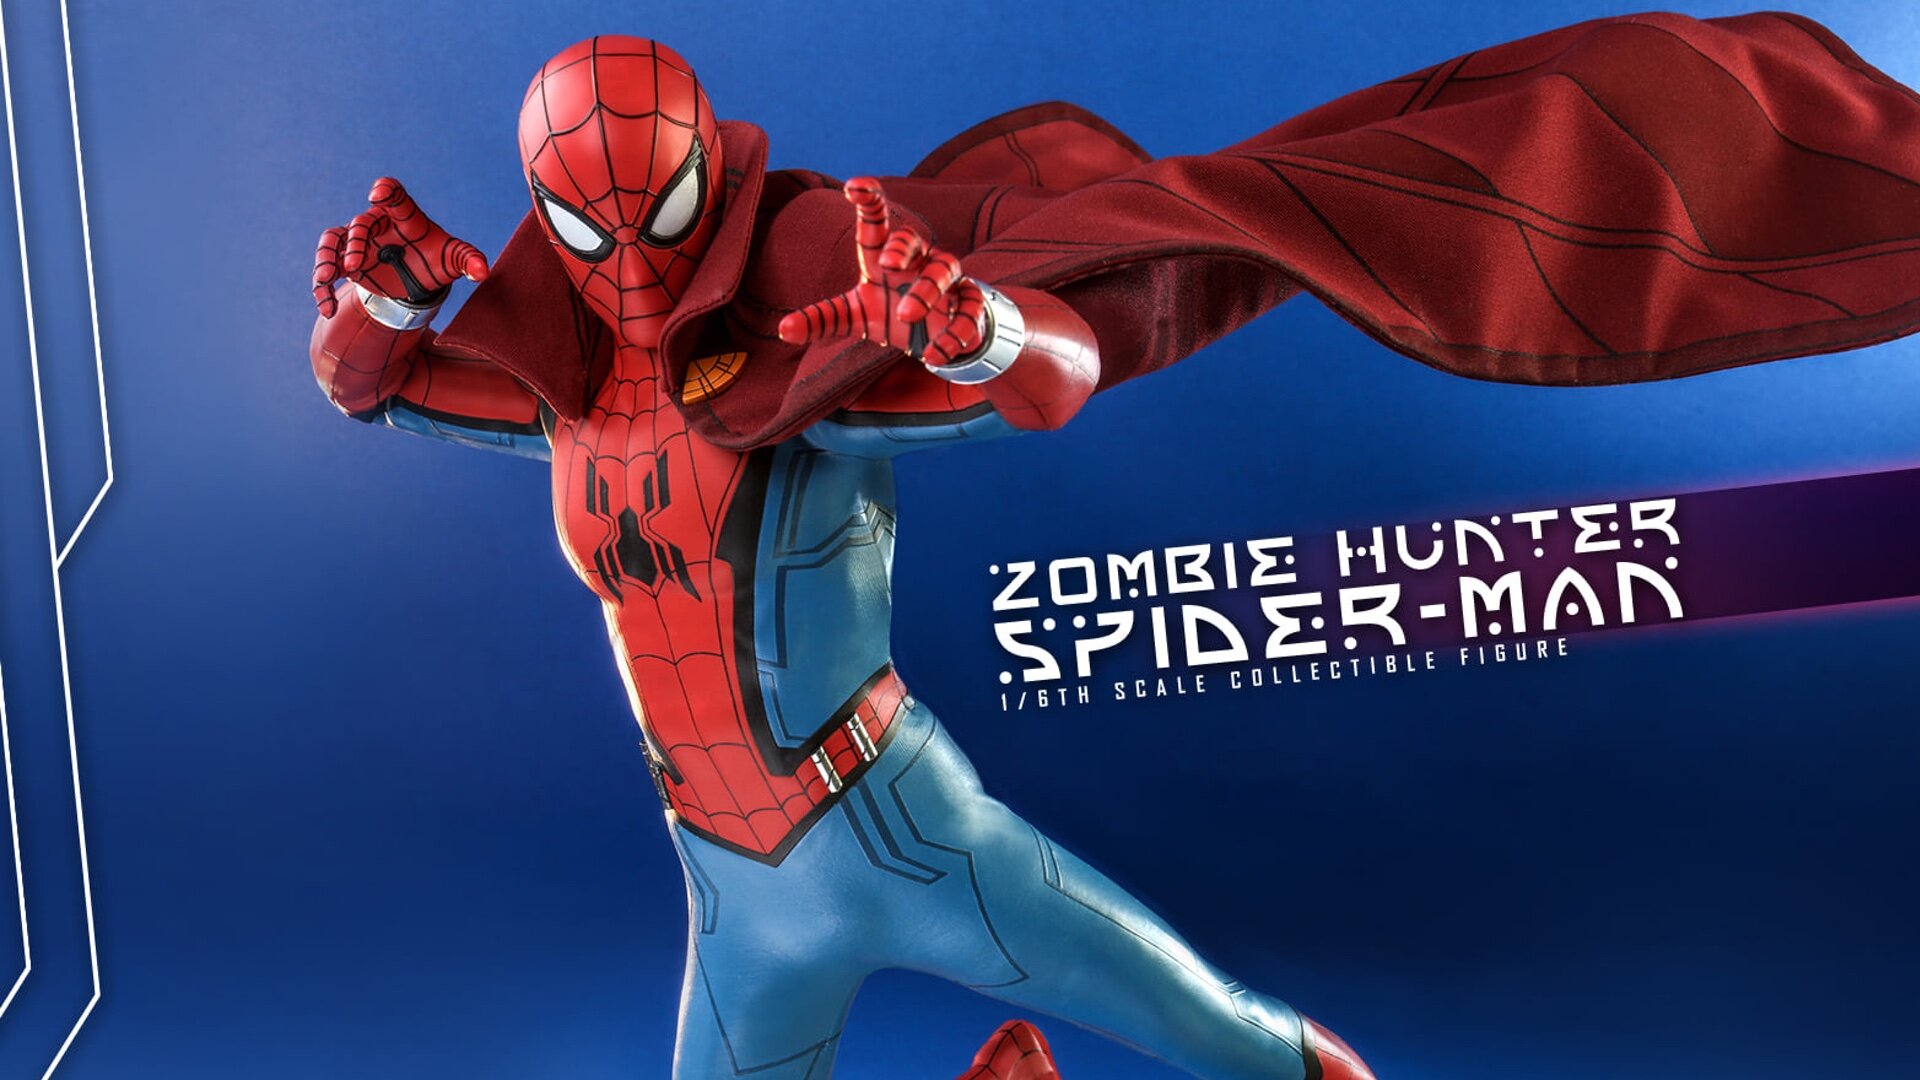 Check Out This Zombie Hunter Spider-Man WHAT IF...? Action Figure